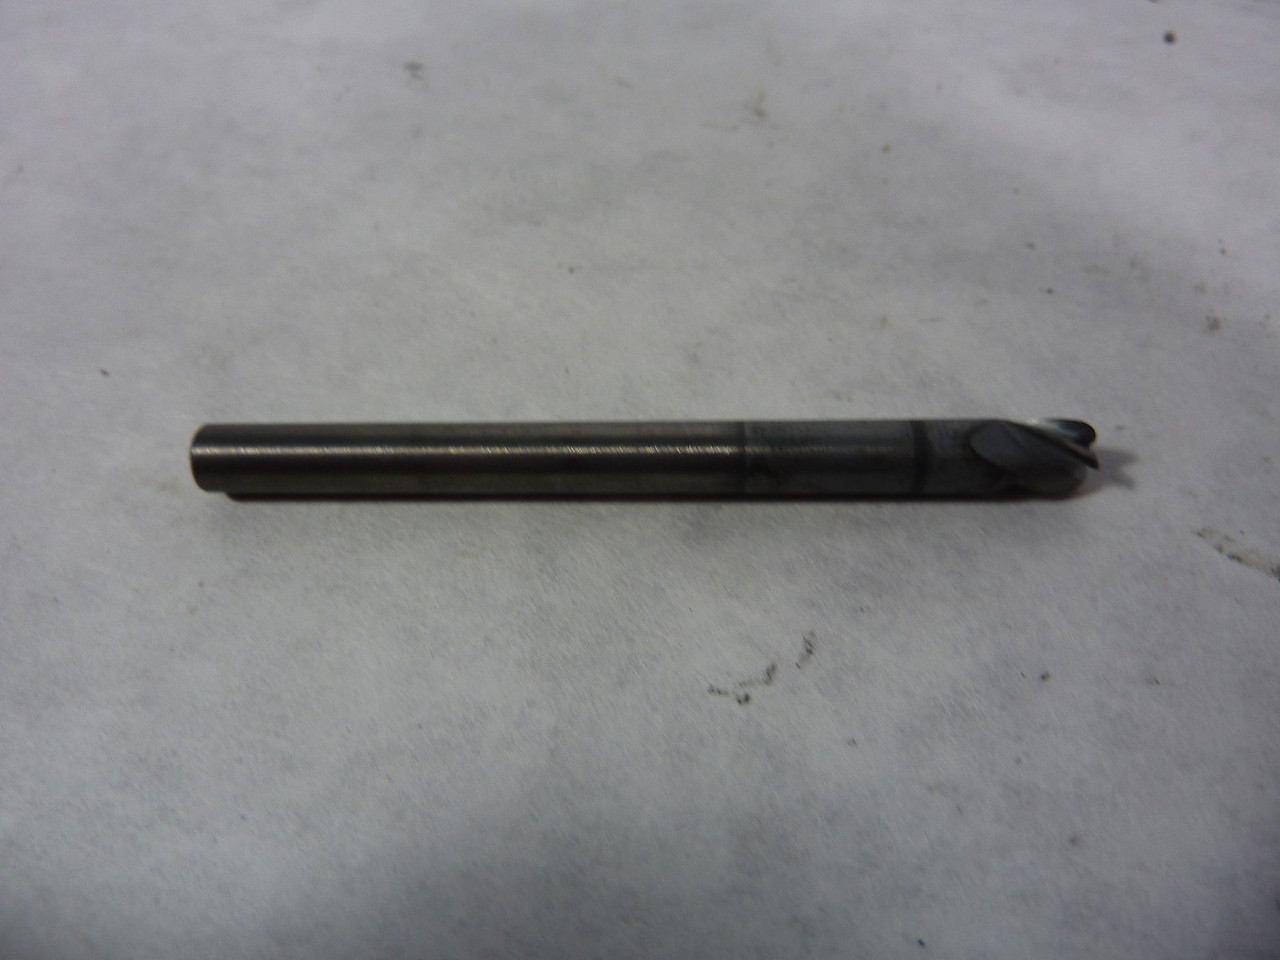 DeBoers 11809 5.5mm 4.050" Carbide Drill Bit USED